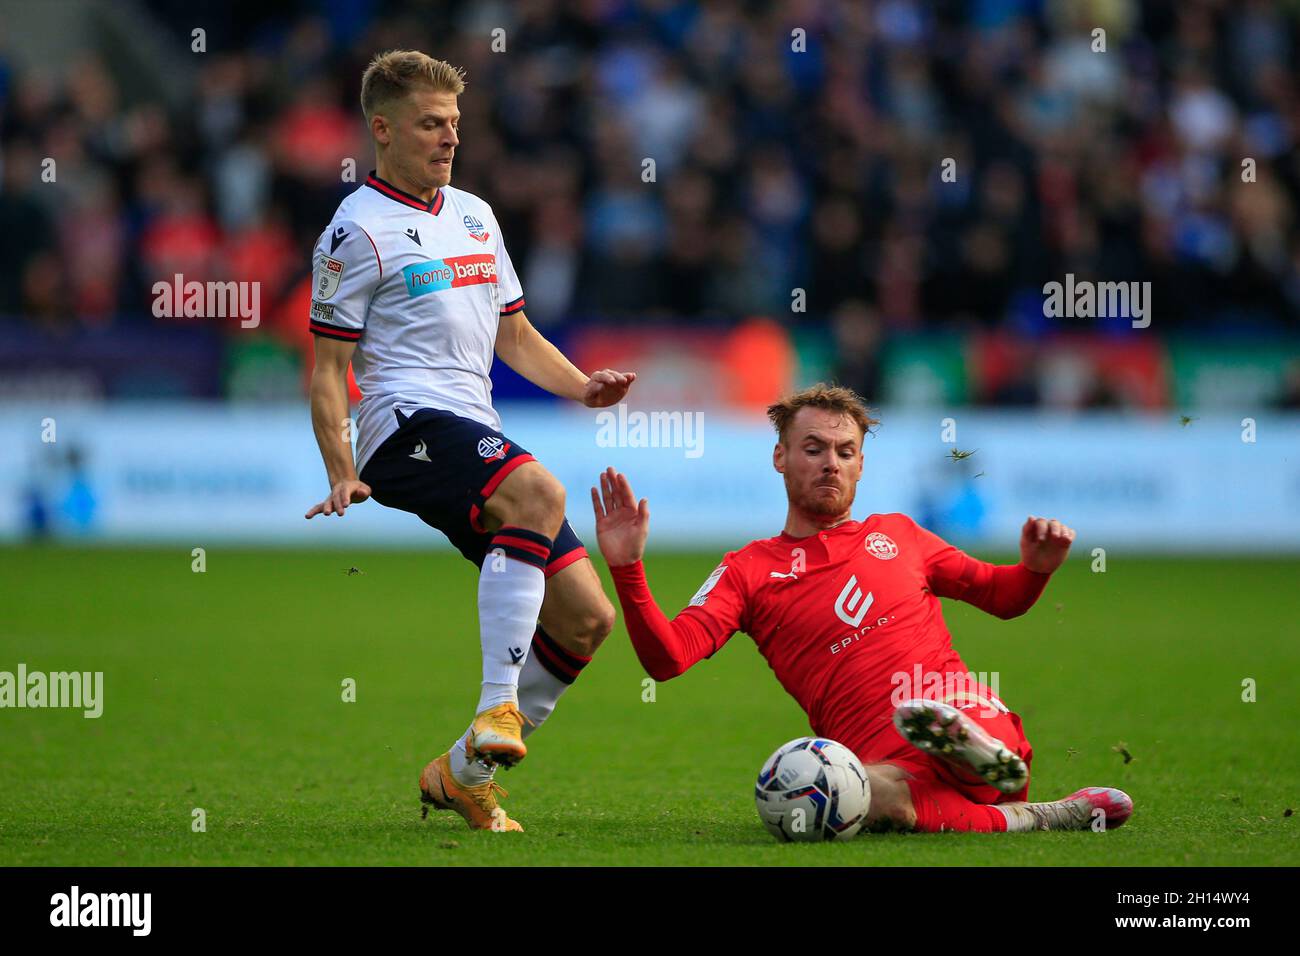 Lloyd Isgrove #23 of Bolton Wanderers is challenged by Tom Naylor #4 of Wigan Athletic Stock Photo